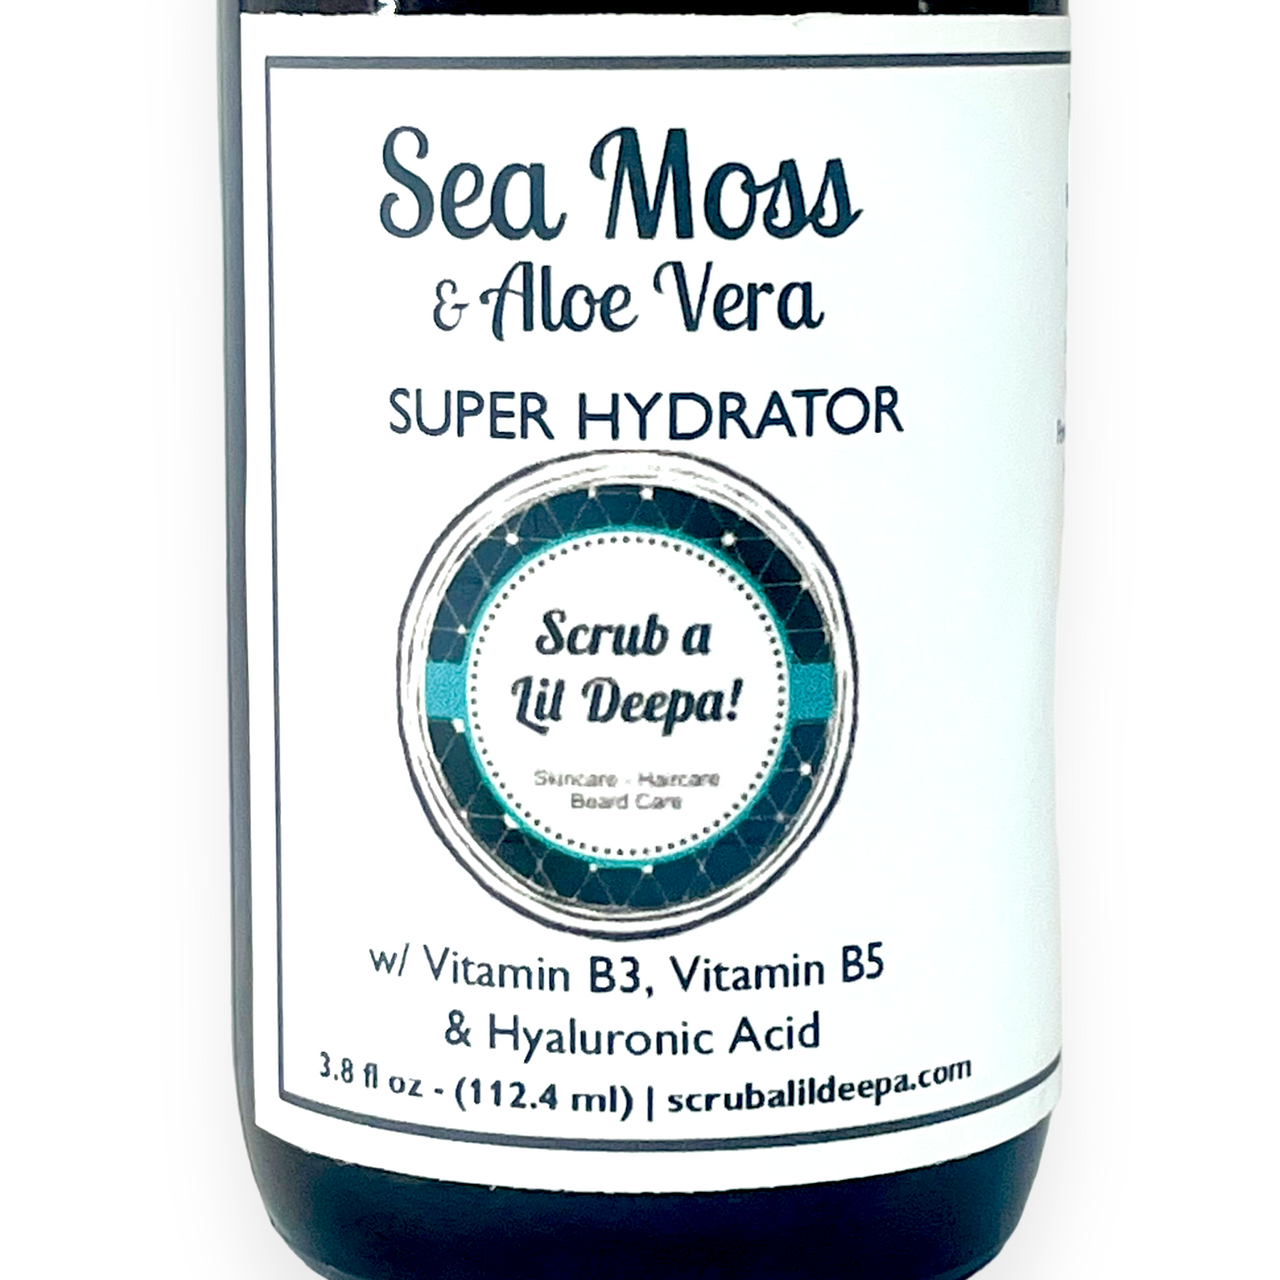 Super Hydrator with Sea Moss & Hyaluronic Acid